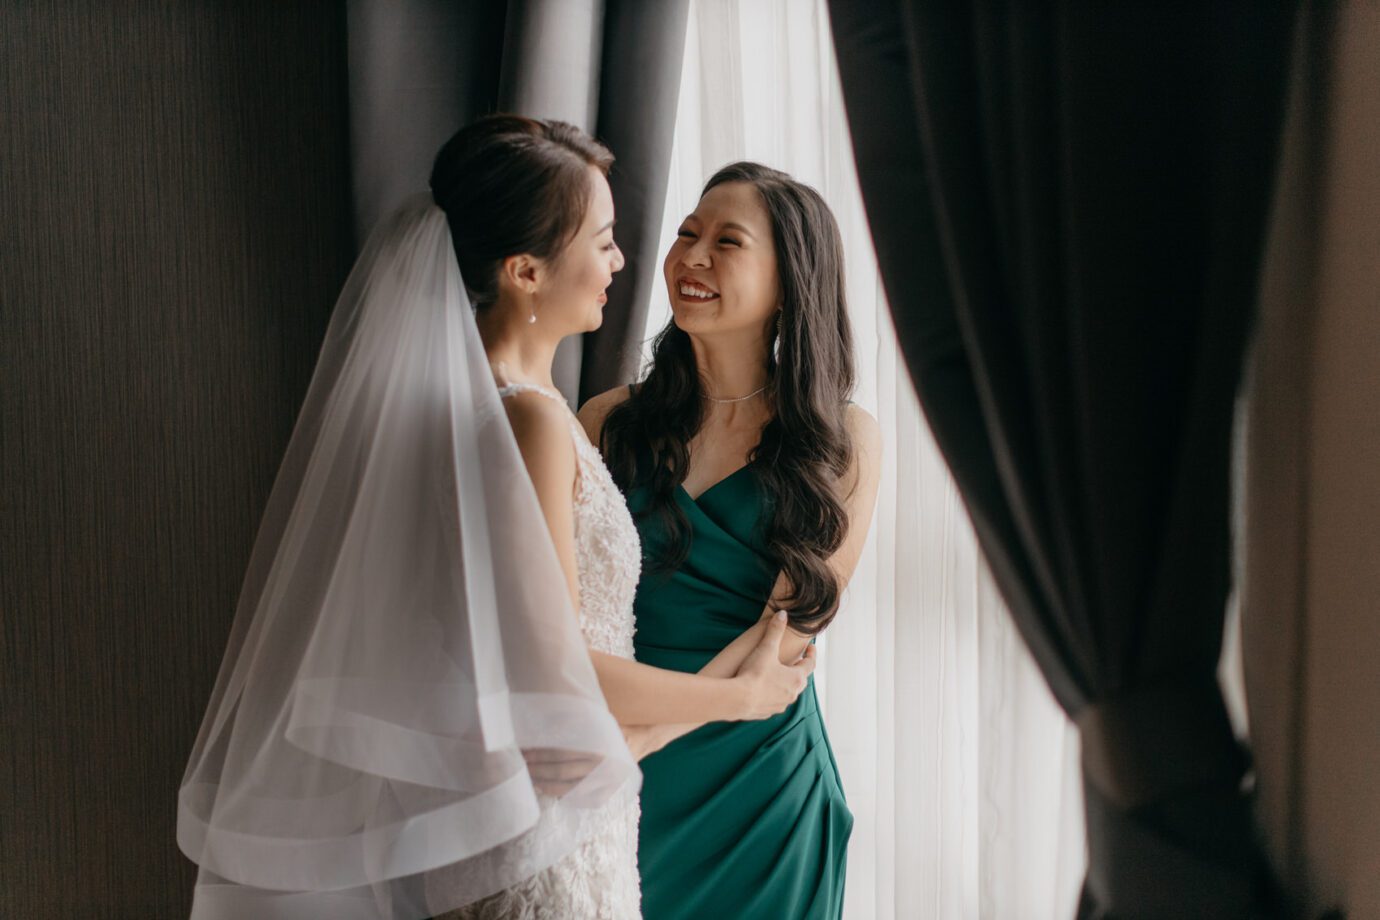 Siblings moment Bride getting ready Janice and Christopher church wedding at St Mary's Cathedral Kuala Lumpur Love, democracy, and everlasting memories, Malaysia 15th General Election Day, Cliff Choong Photography